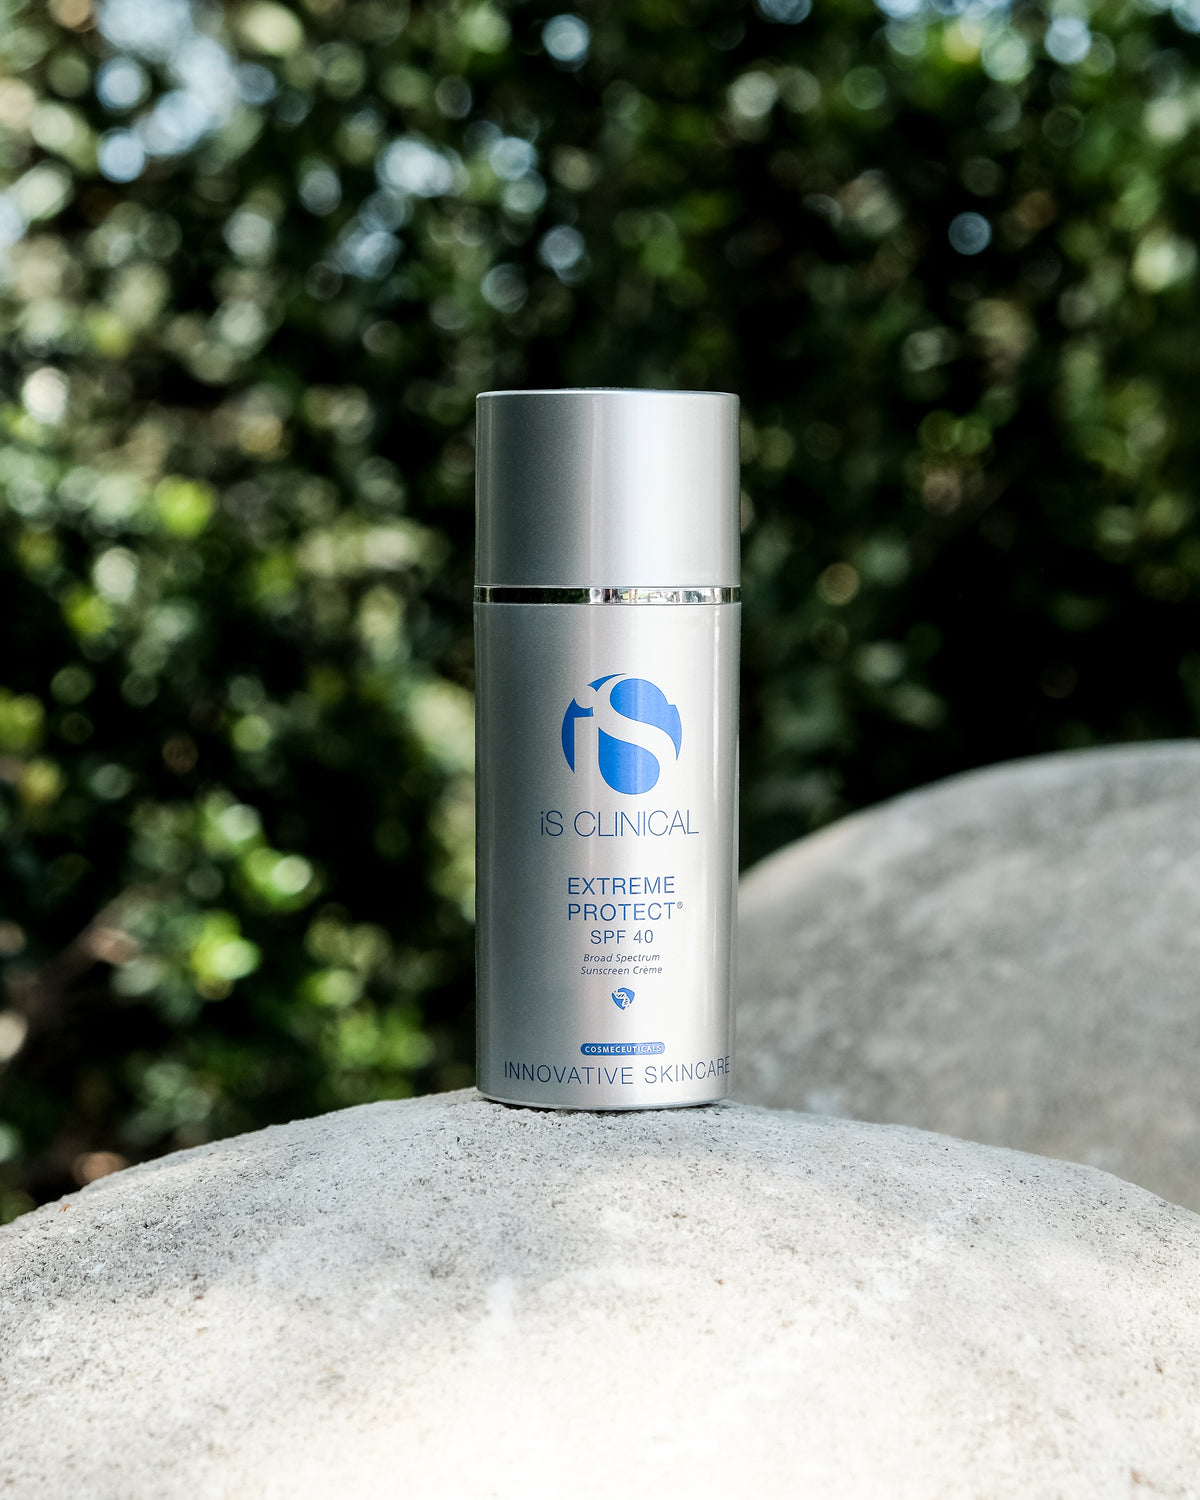 Extreme Protect SPF 40 - iS CLINICAL